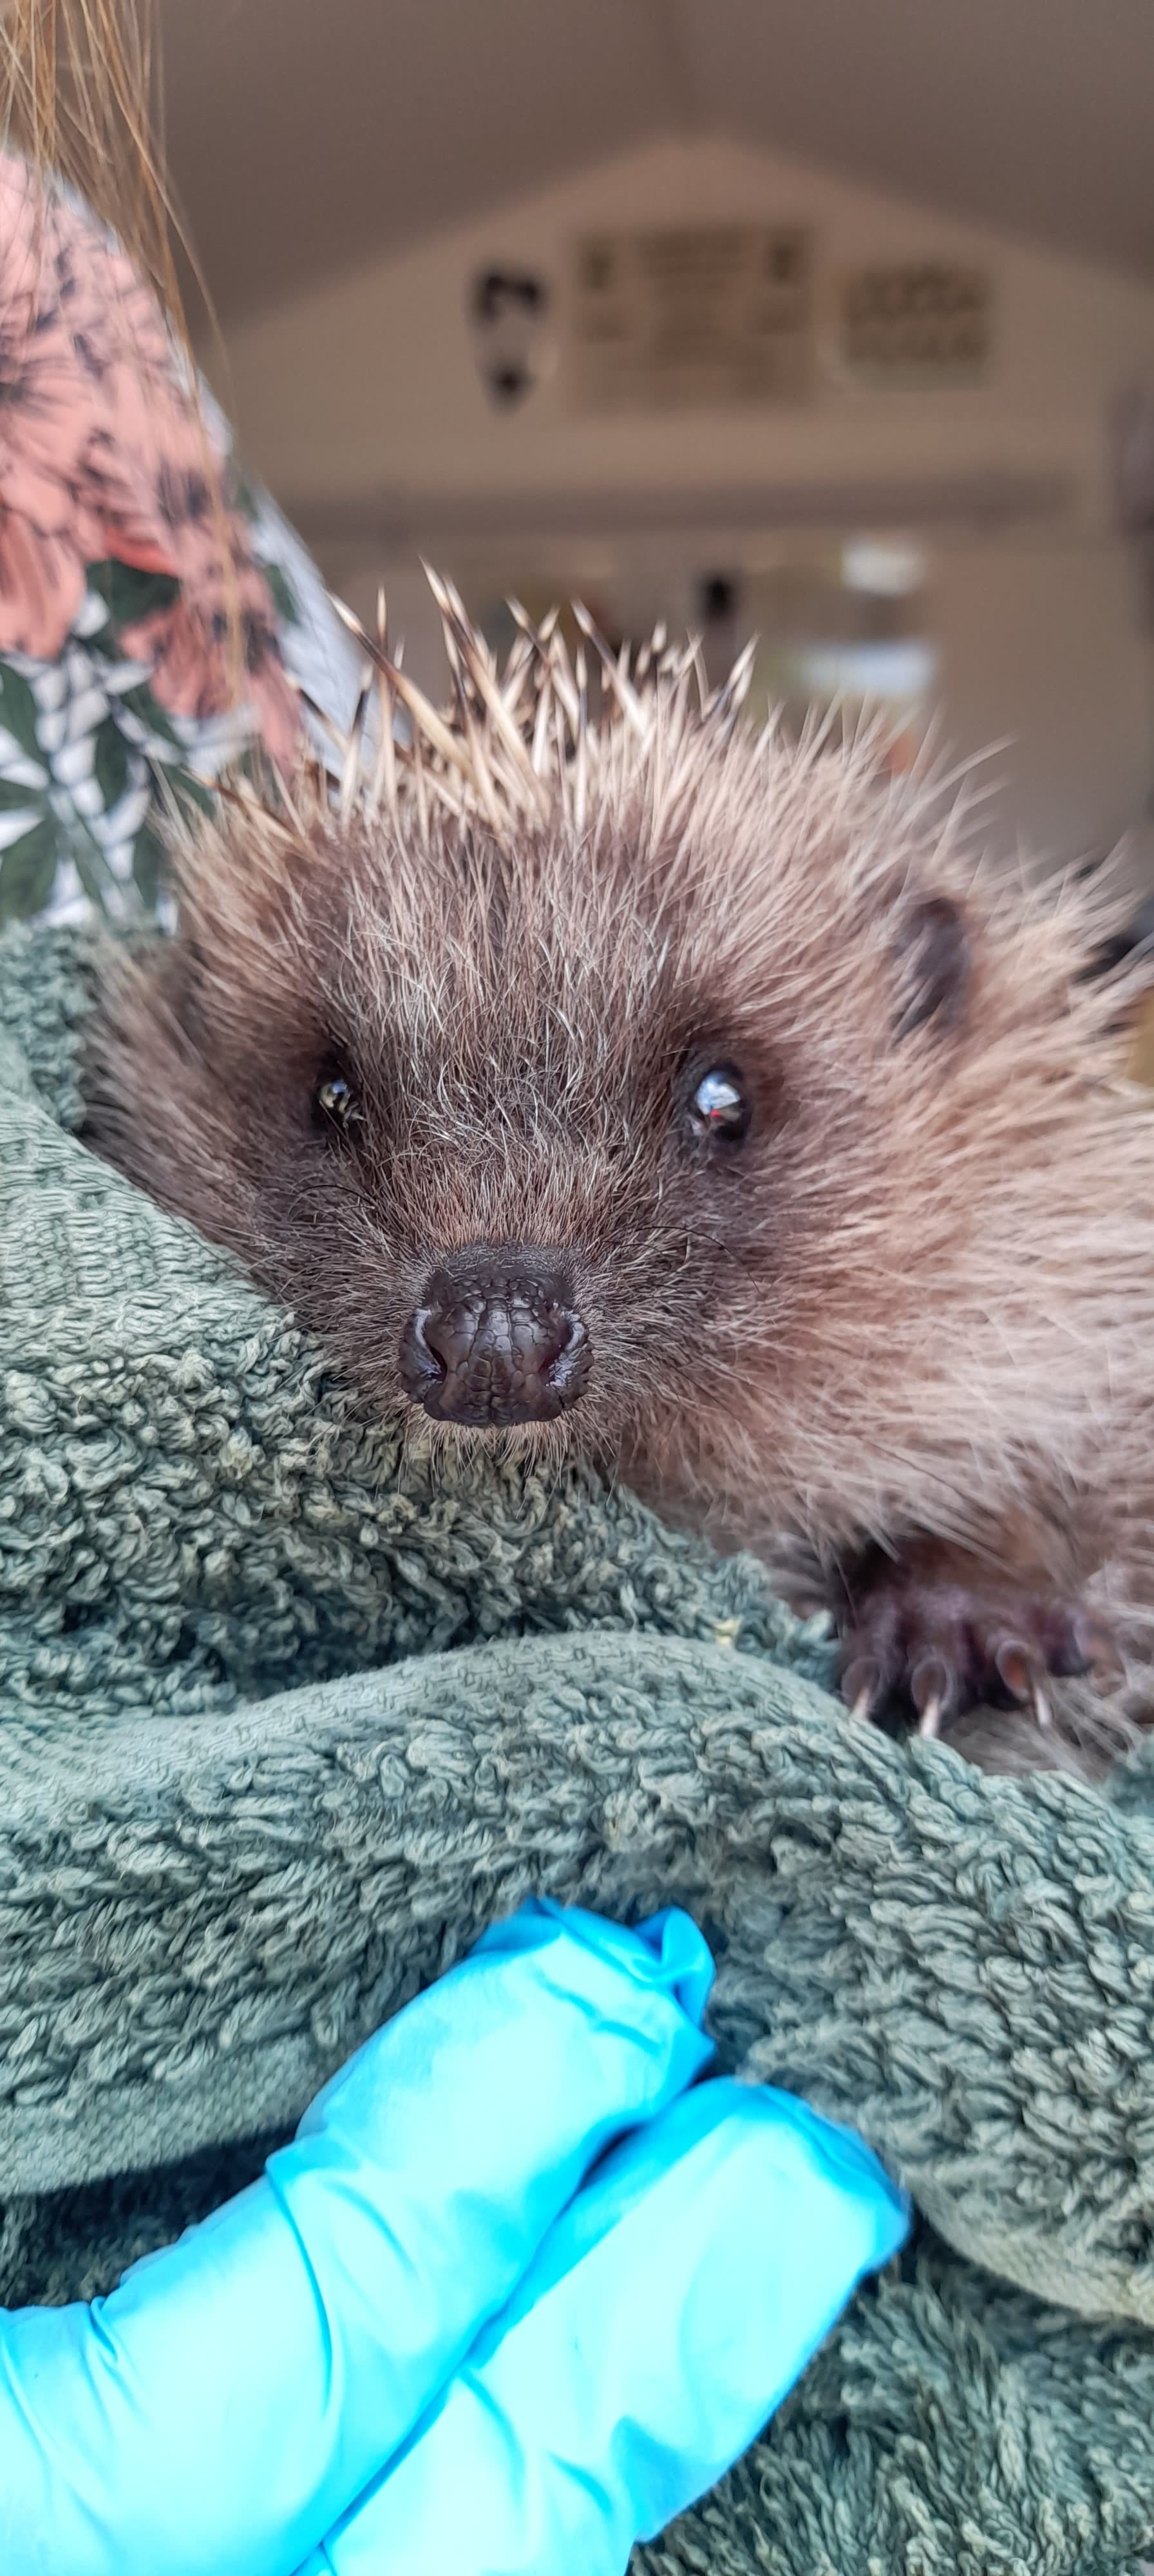 Tracey cares for the hedgehogs so they can be released back into the wild